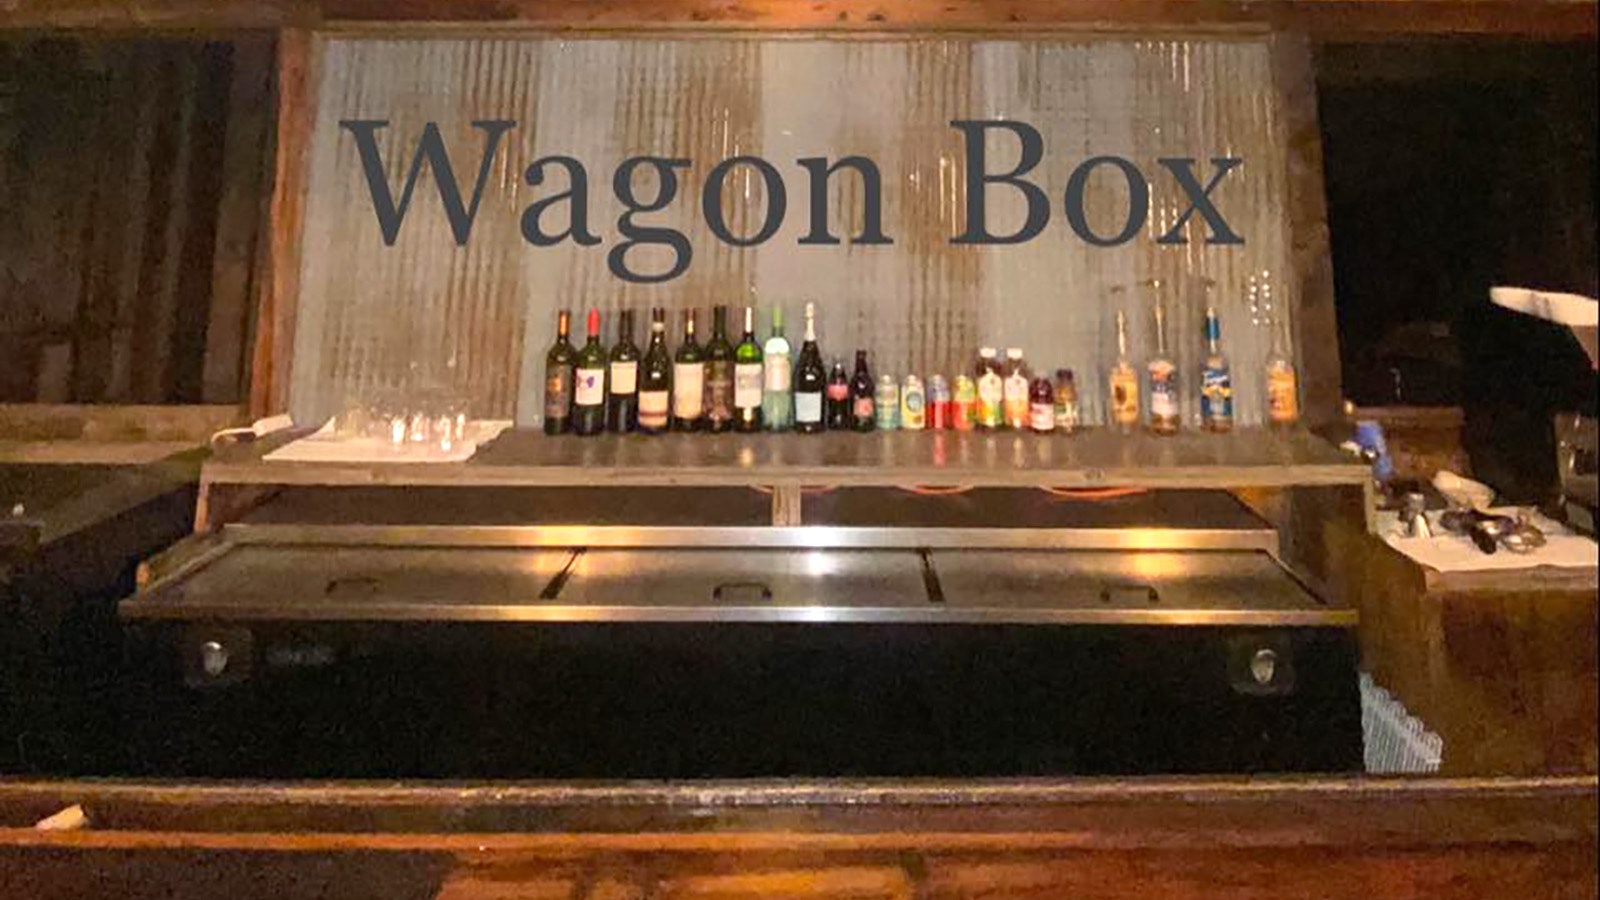 The Wagon Box Inn has been a go-to for Wyoming visitors for more than a century.